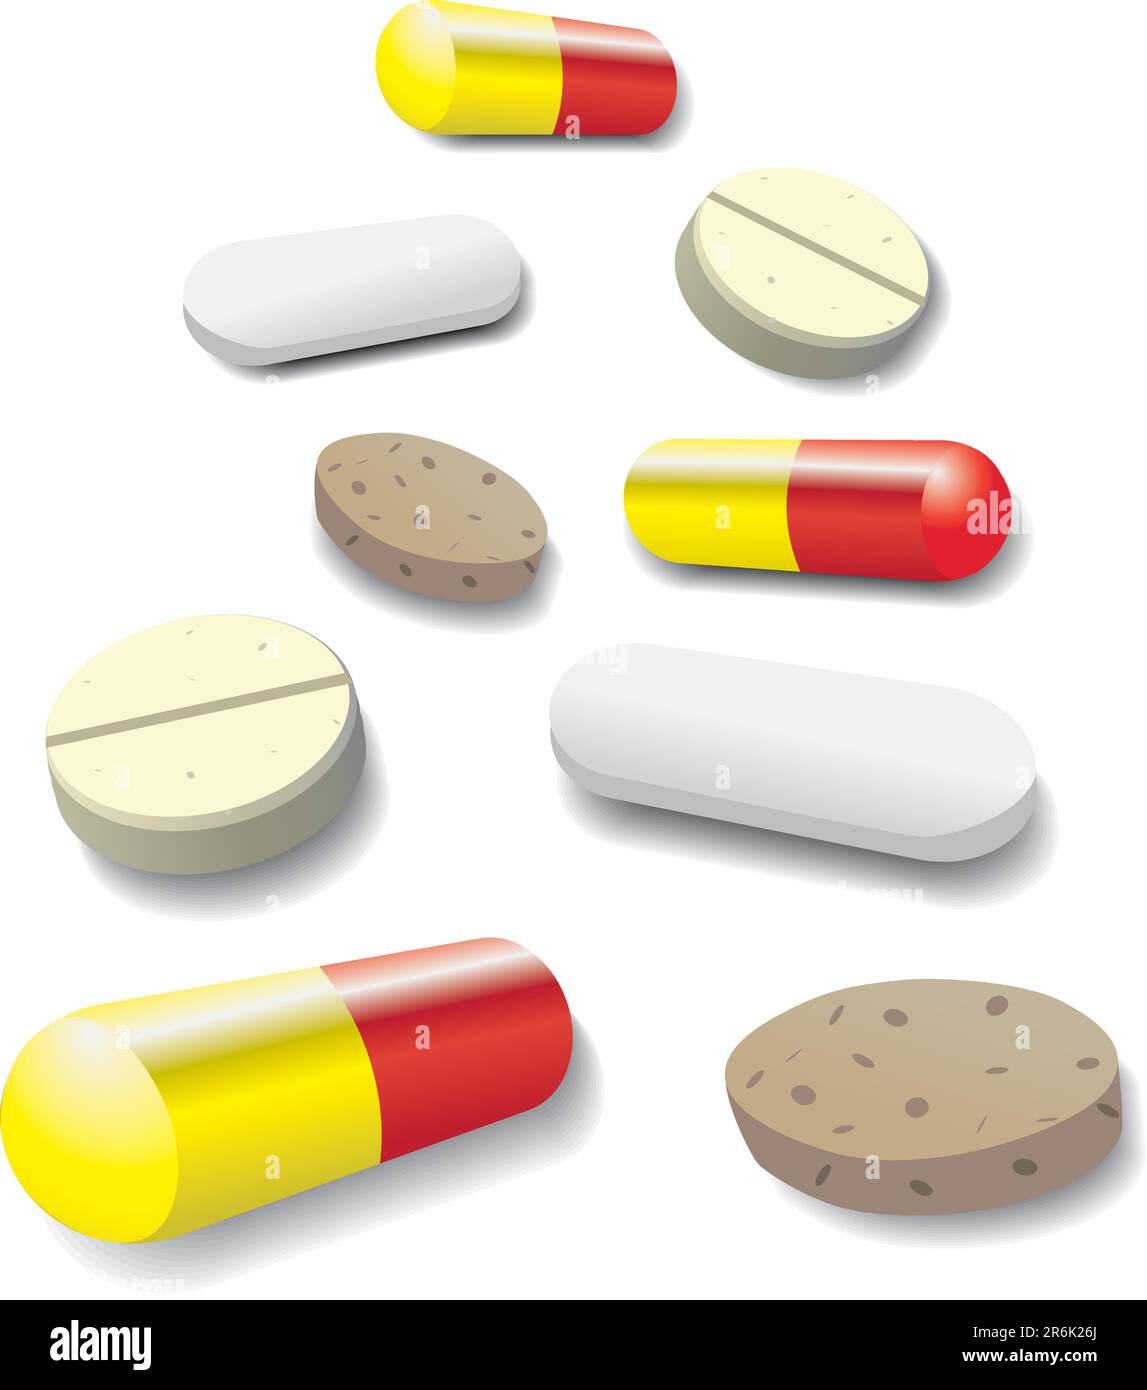 some pills and tabets - illustration Stock Vector